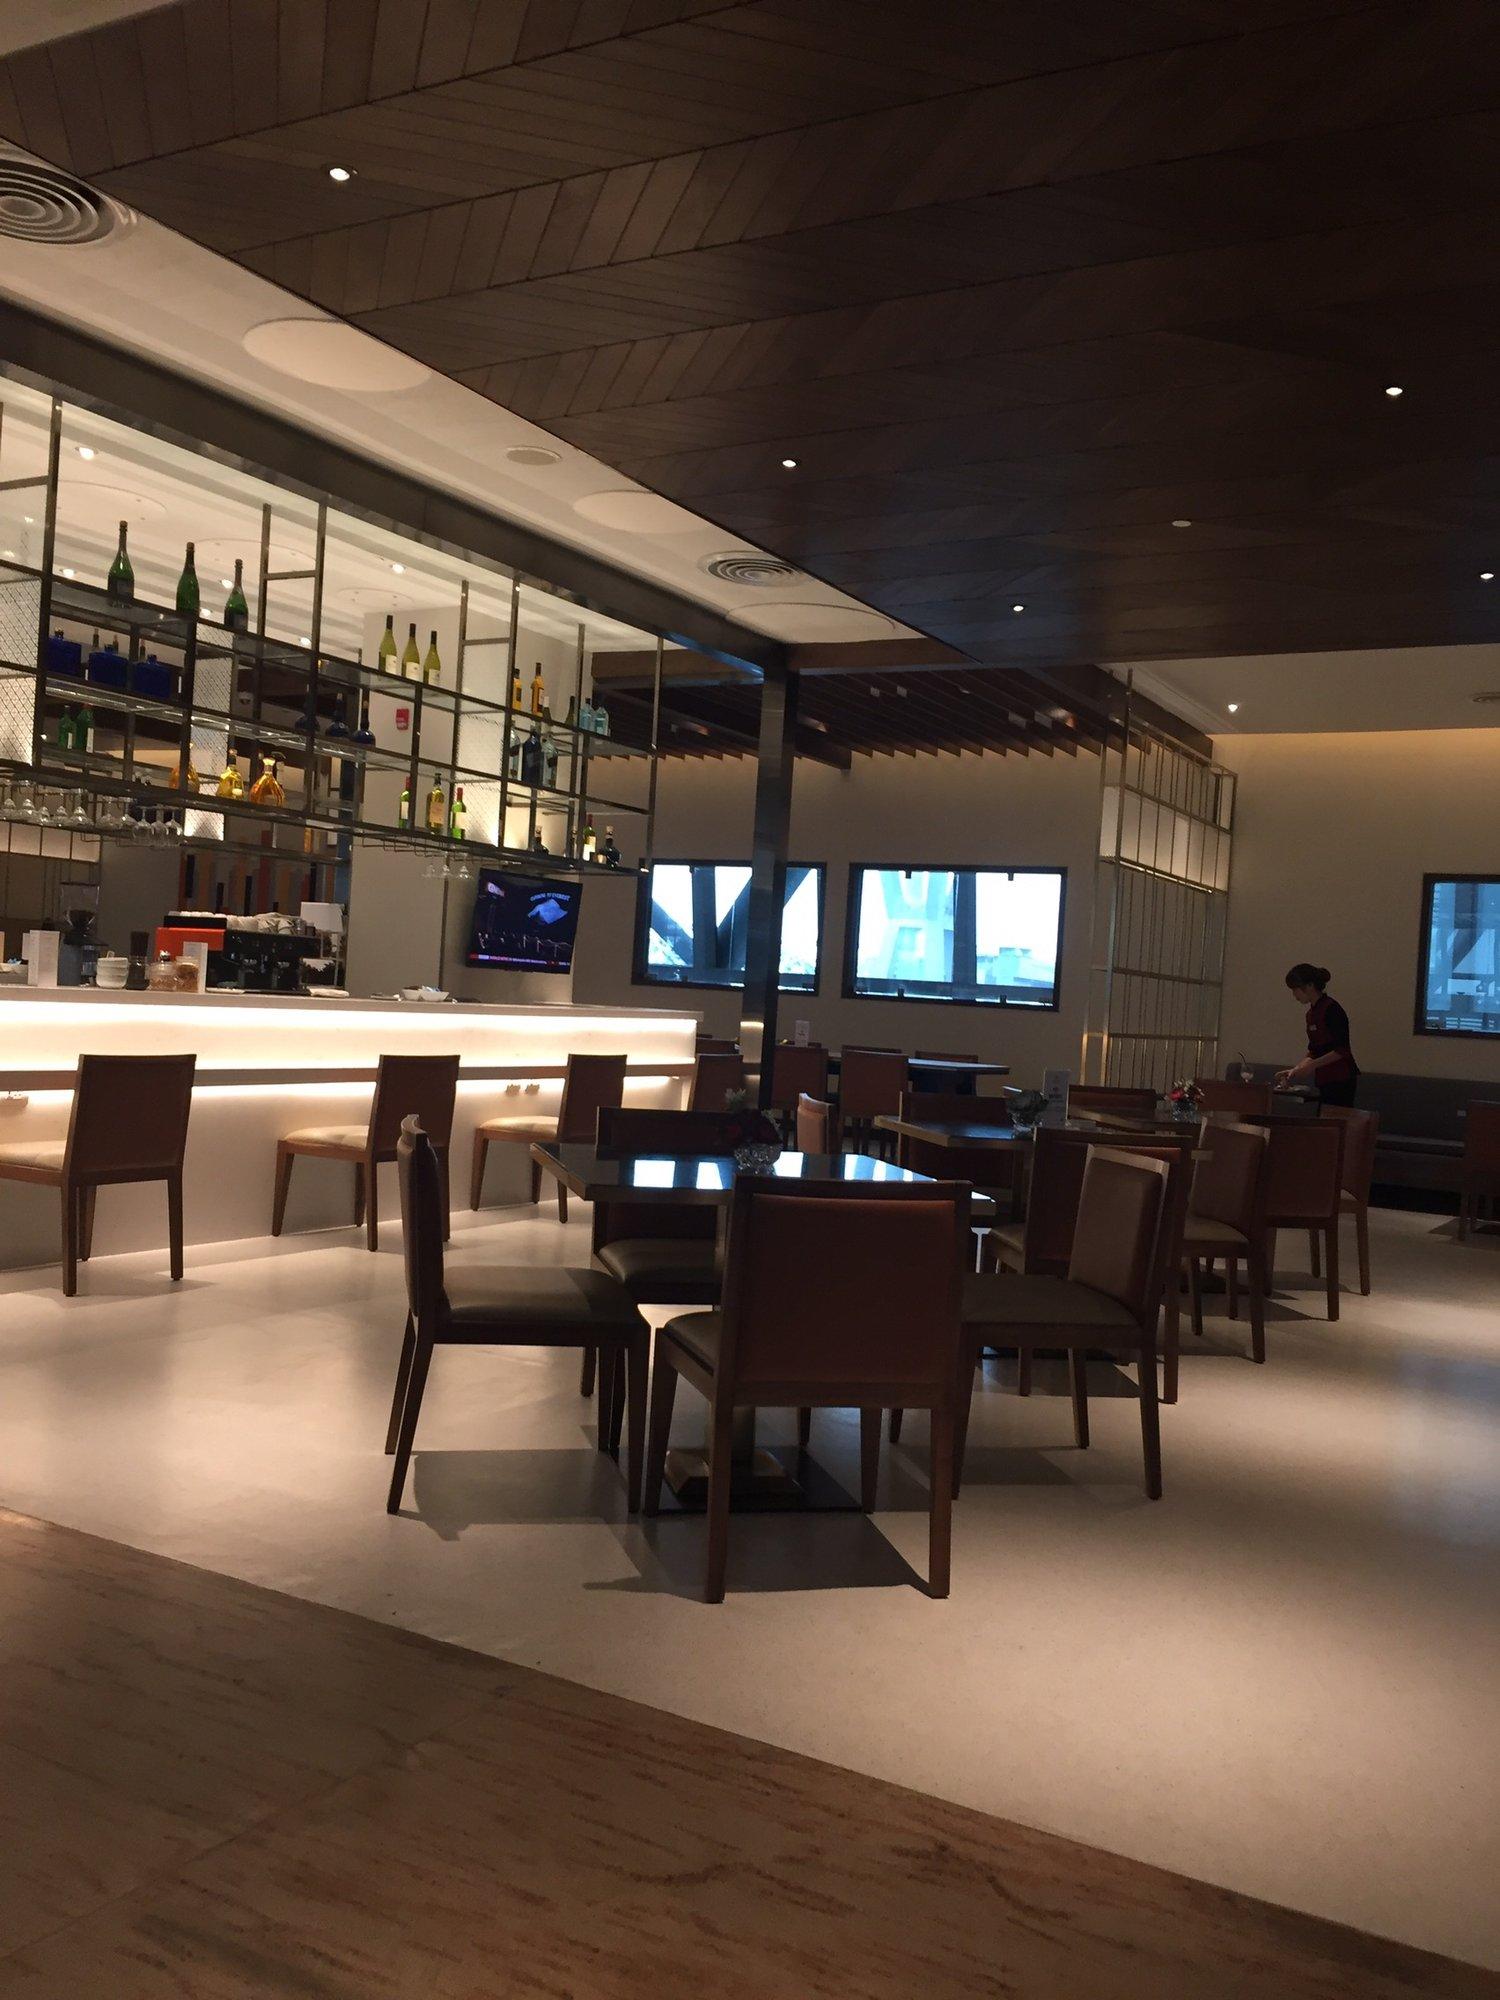 Singapore Airlines SilverKris Business Class Lounge image 7 of 16